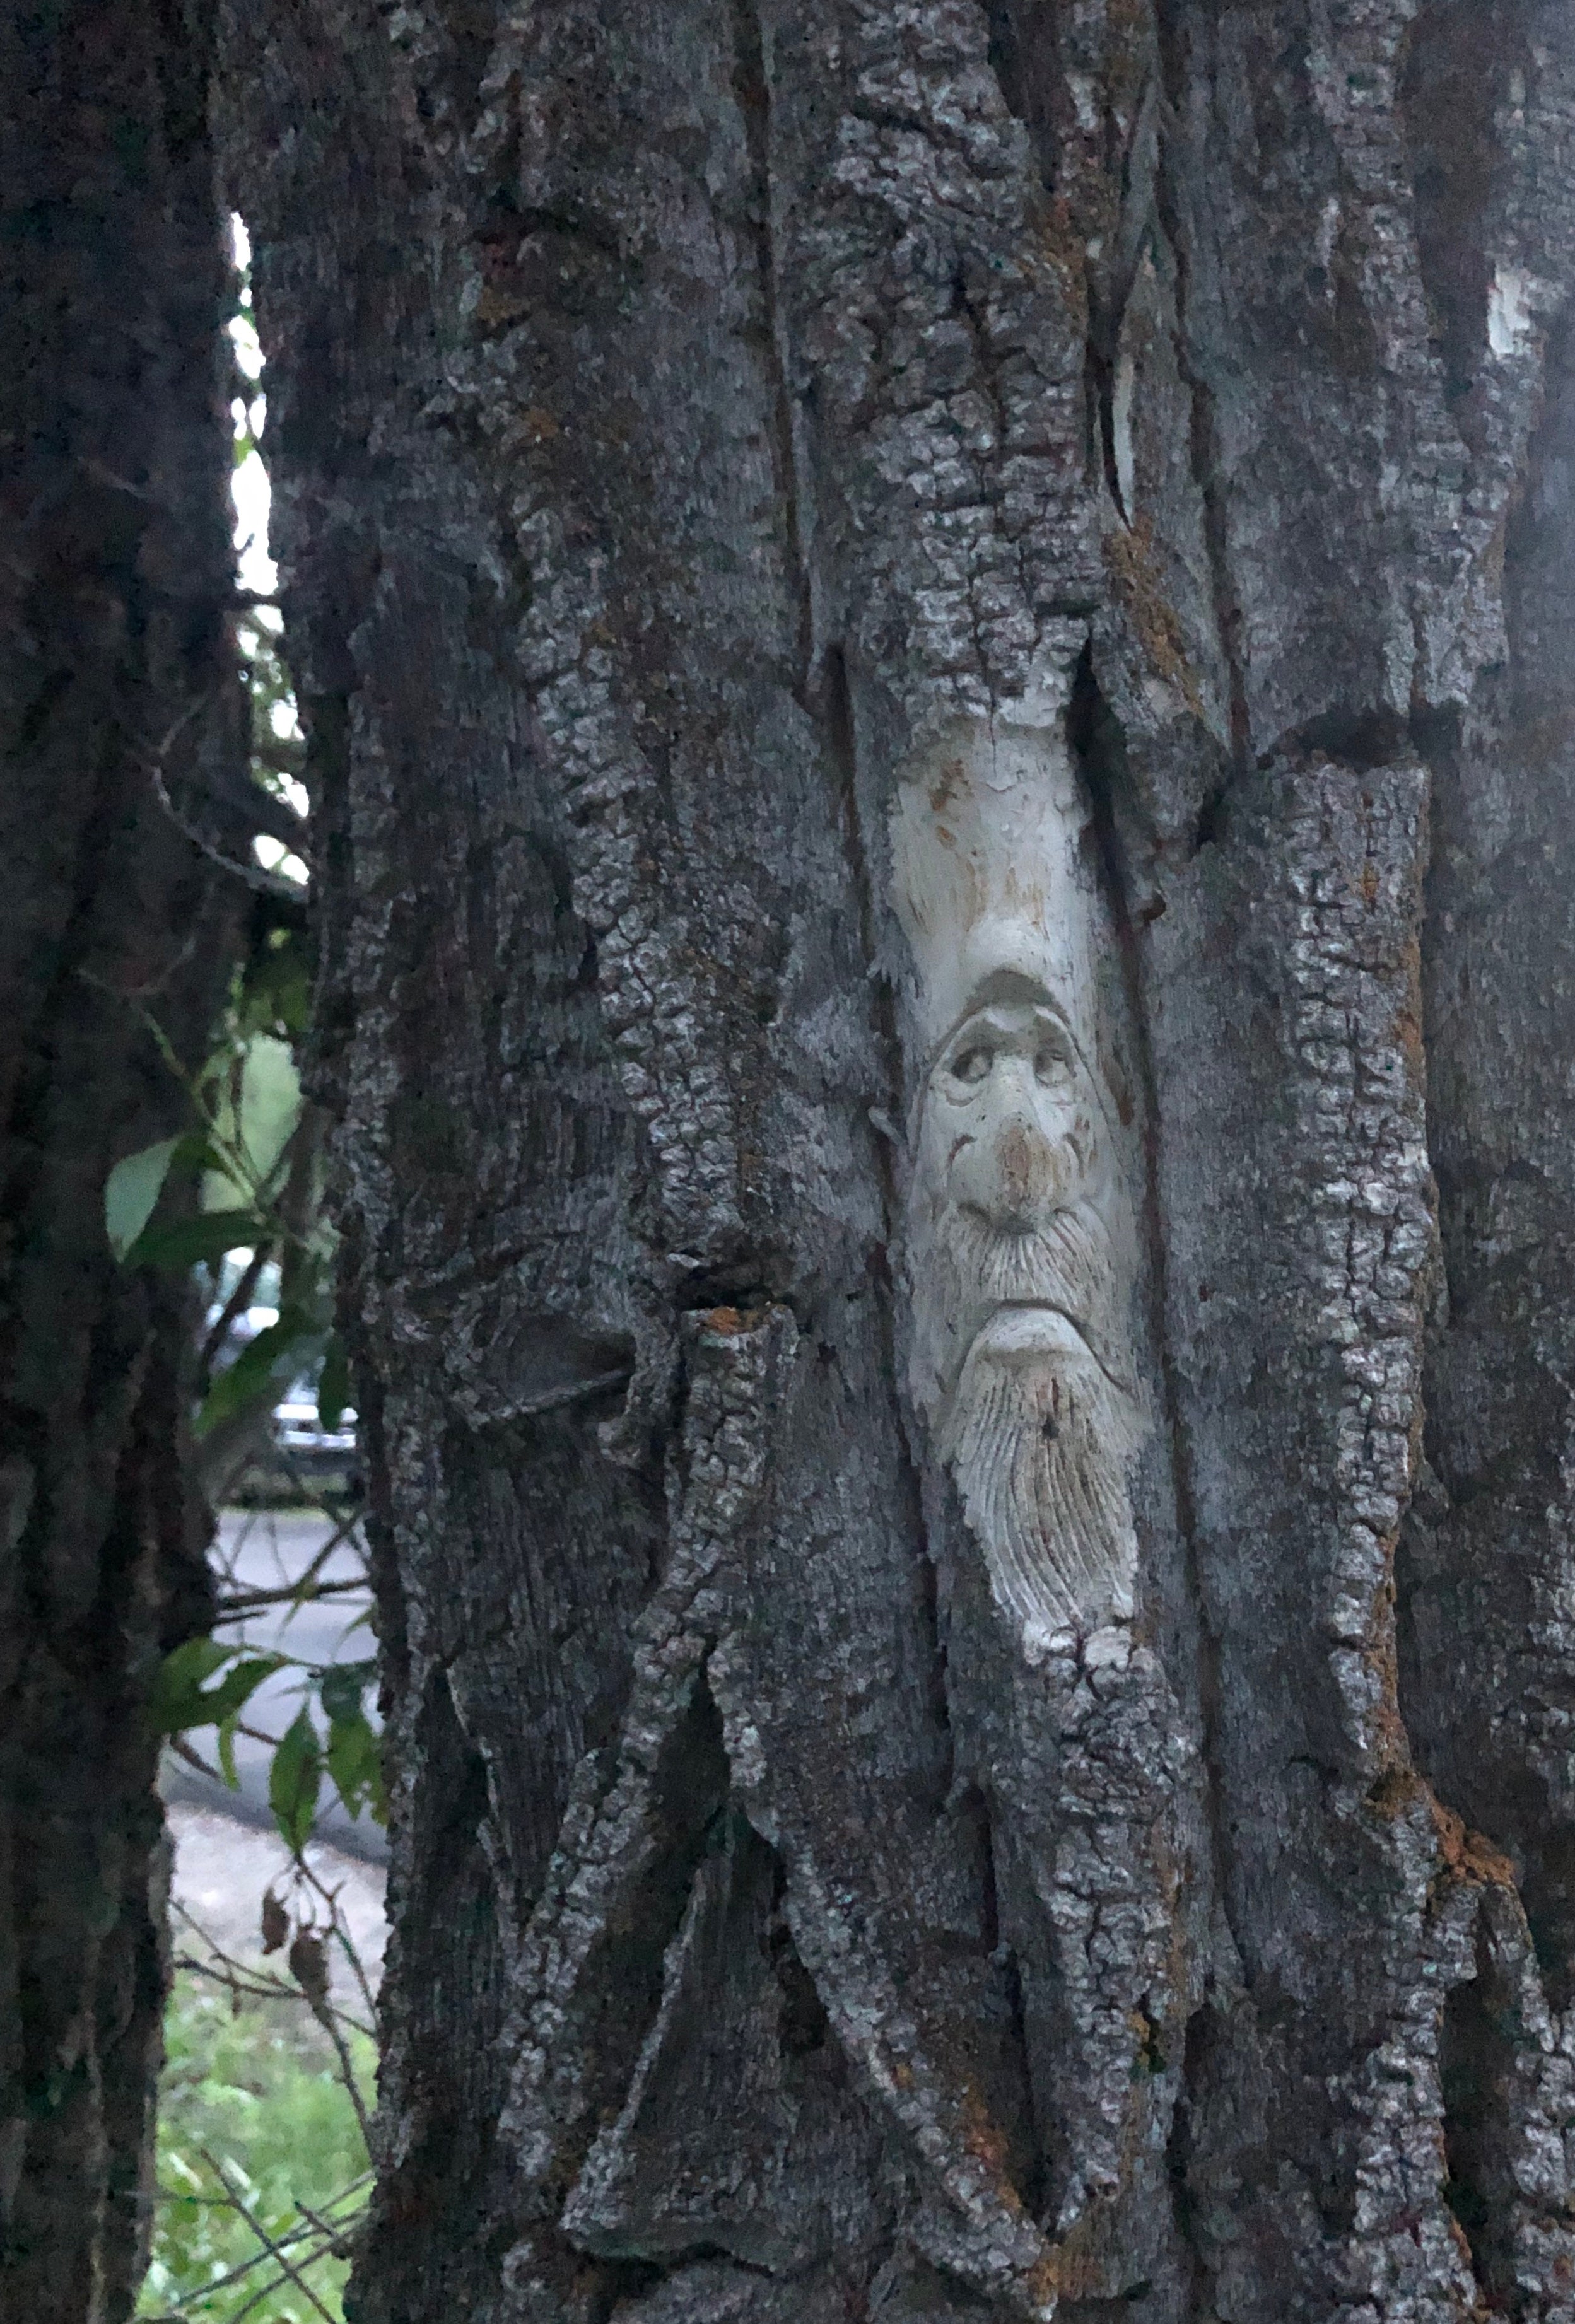 The carving in the tree at Site D184